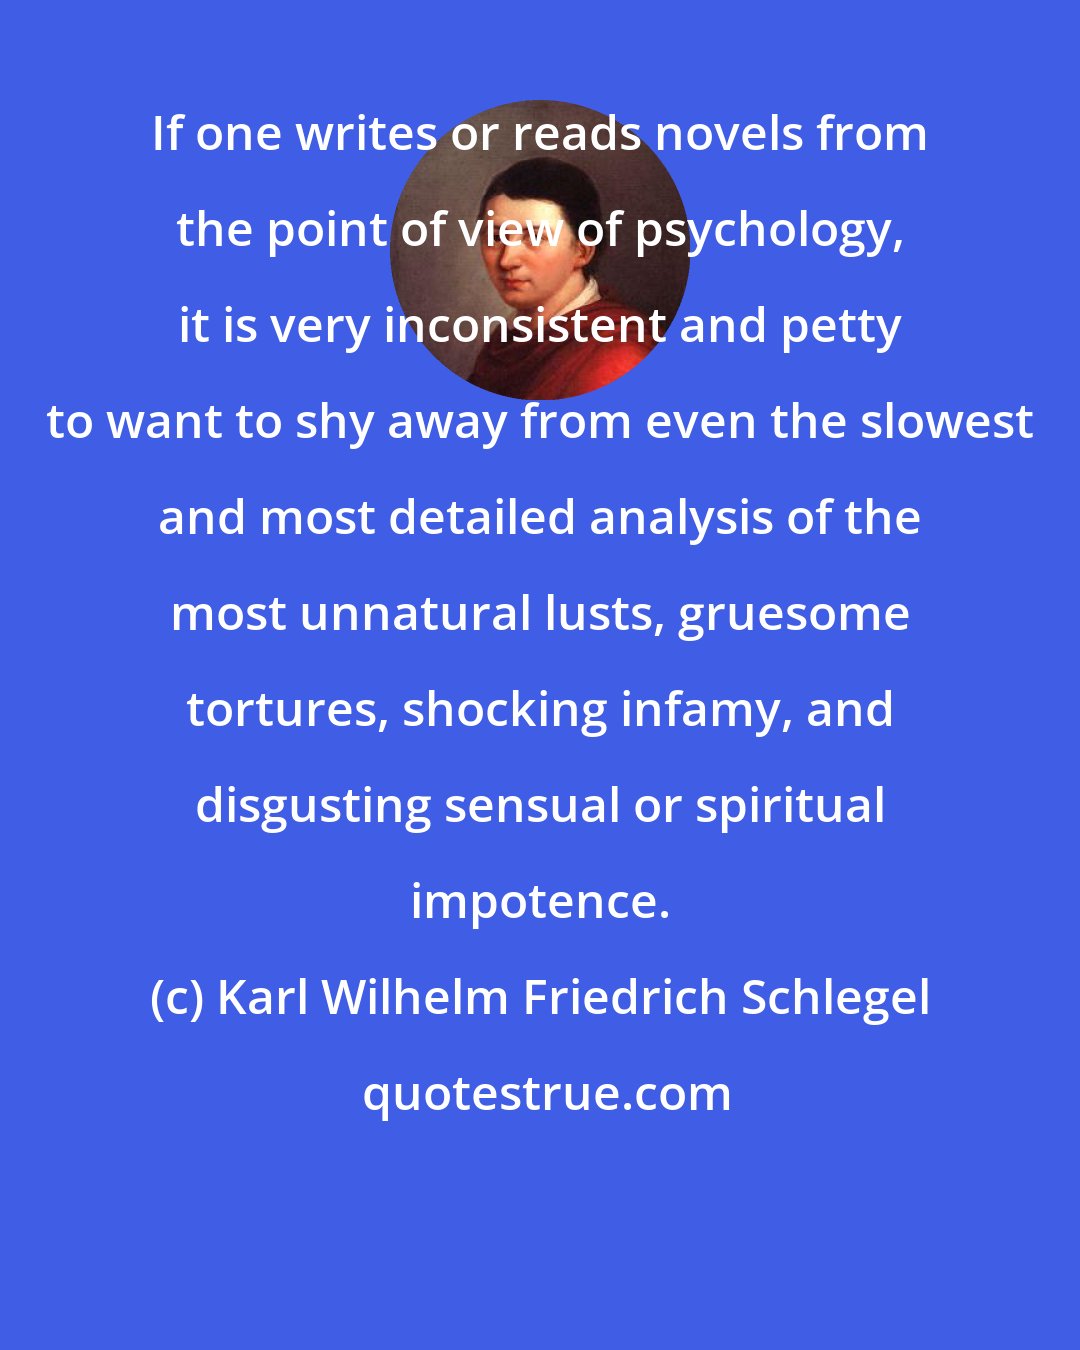 Karl Wilhelm Friedrich Schlegel: If one writes or reads novels from the point of view of psychology, it is very inconsistent and petty to want to shy away from even the slowest and most detailed analysis of the most unnatural lusts, gruesome tortures, shocking infamy, and disgusting sensual or spiritual impotence.